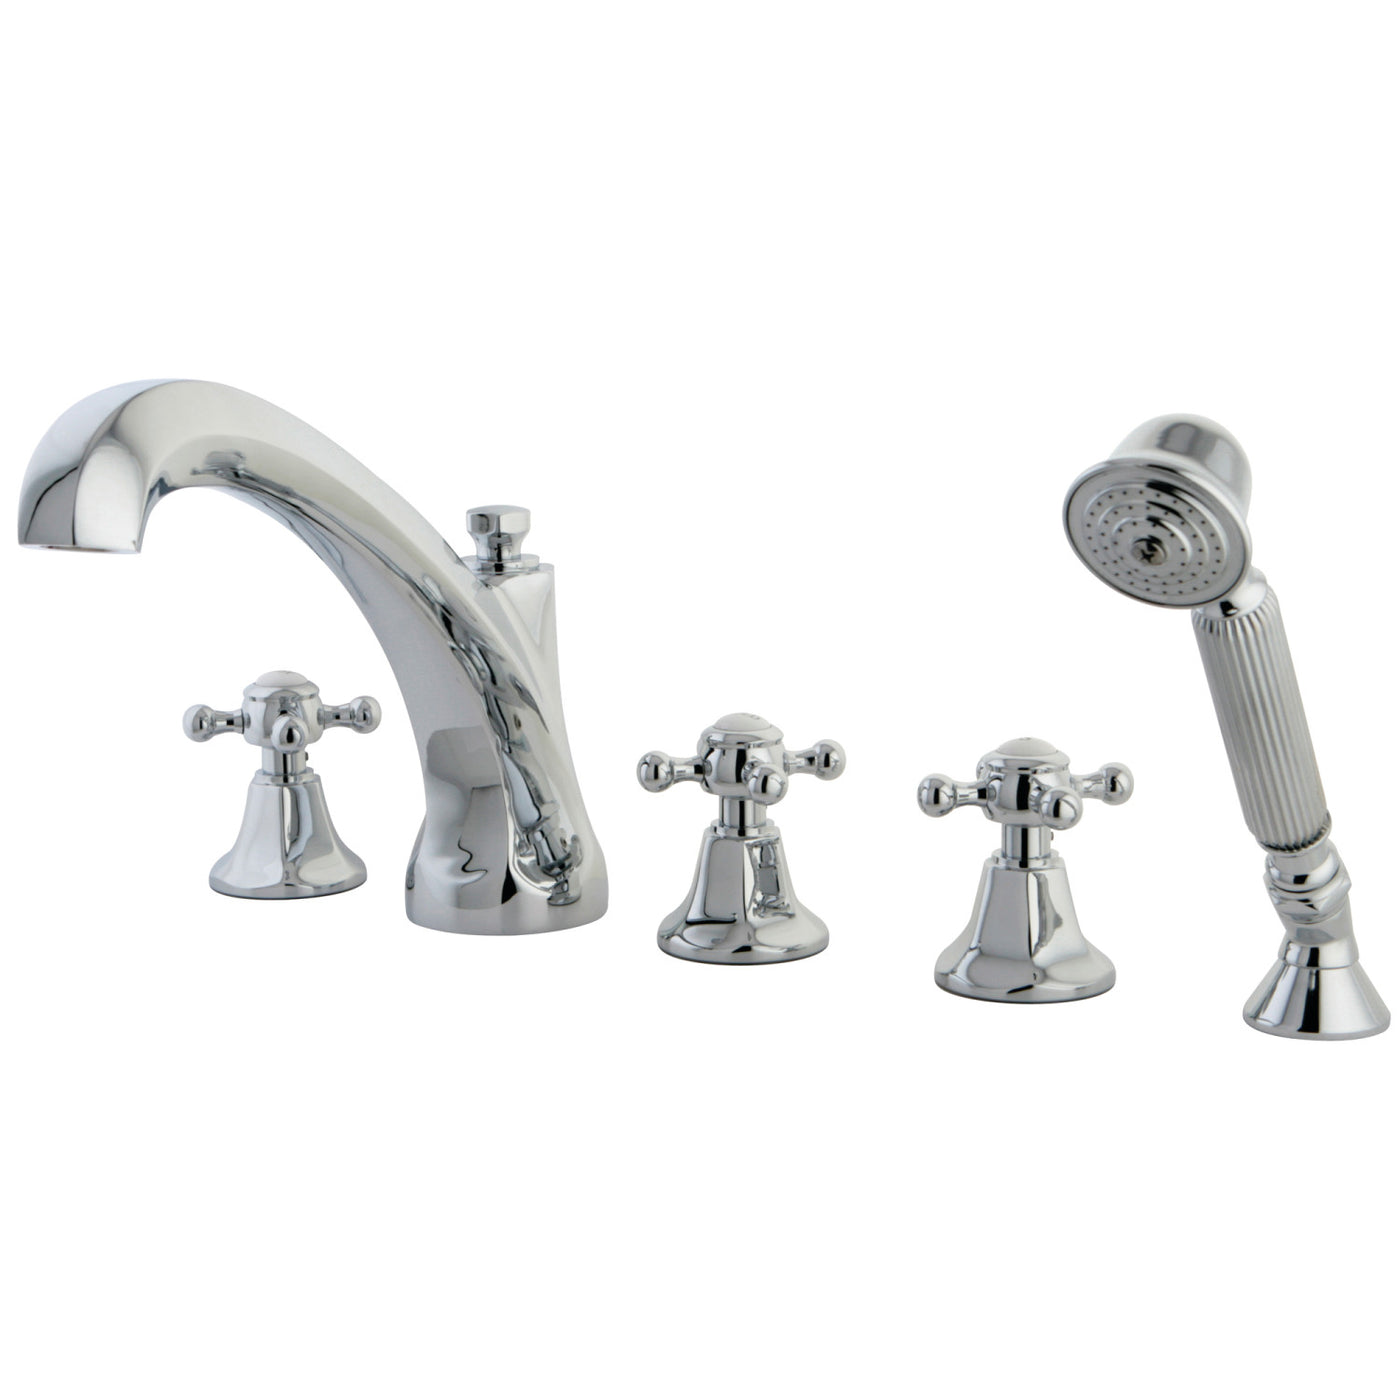 Elements of Design ES43215BX Roman Tub Faucet with Hand Shower, Polished Chrome